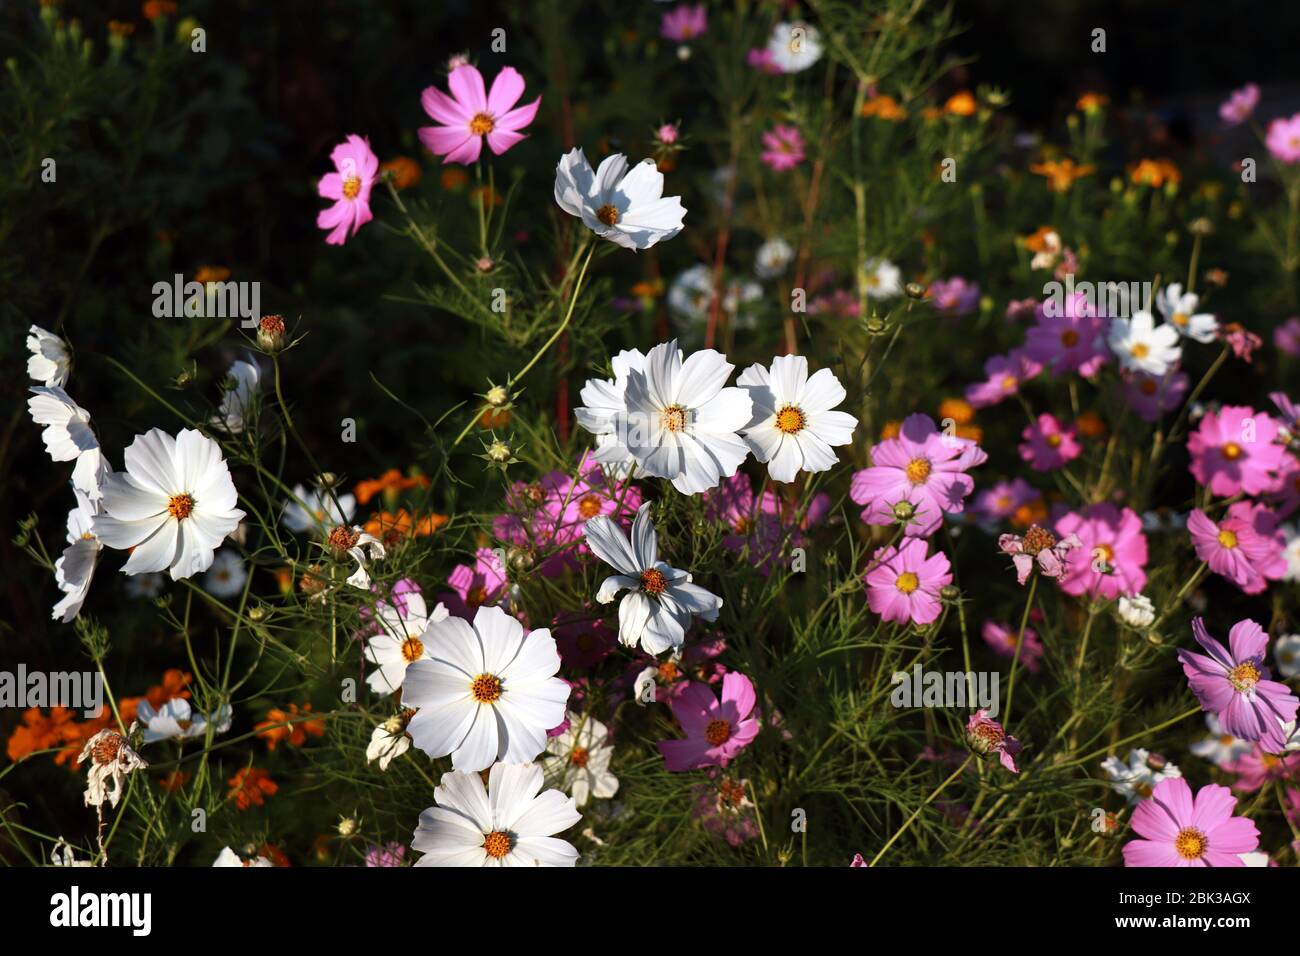 Beautiful purple and white Cosmos flowers in the garden. Violet and white flowers pictures. Cosmos bipinnatus, commonly called the garden cosmos. Stock Photo